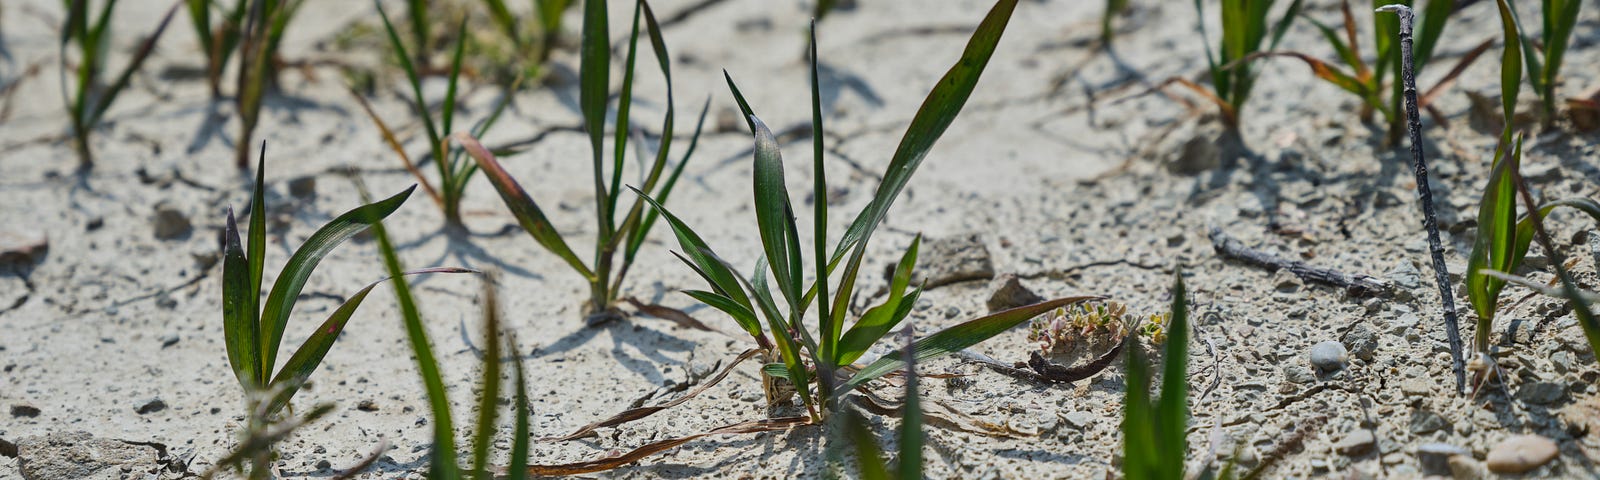 New plant shoots in sand